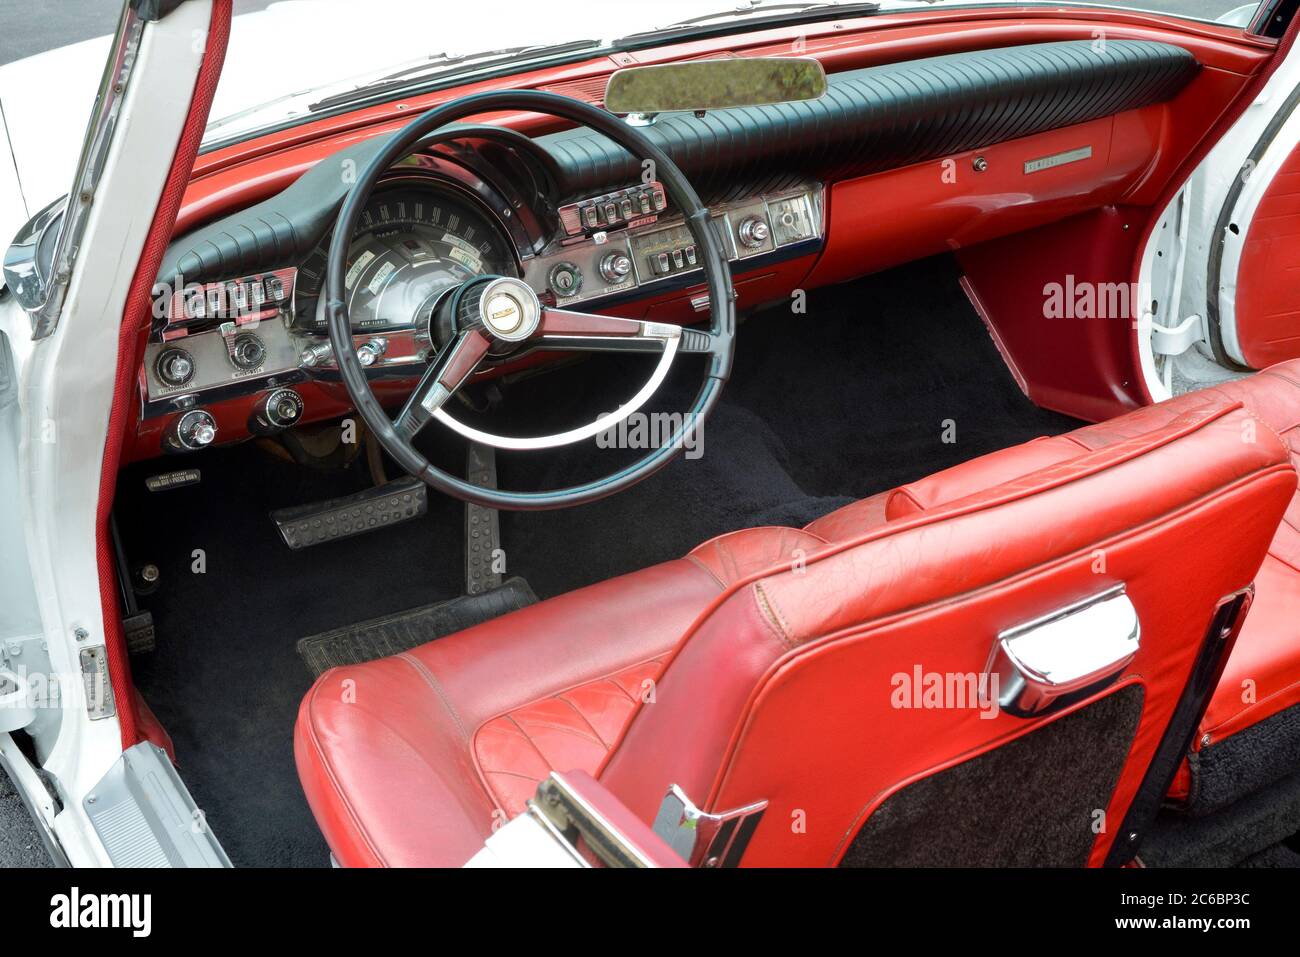 1962 Chrysler Newport convertible red interior and dashboard Stock Photo